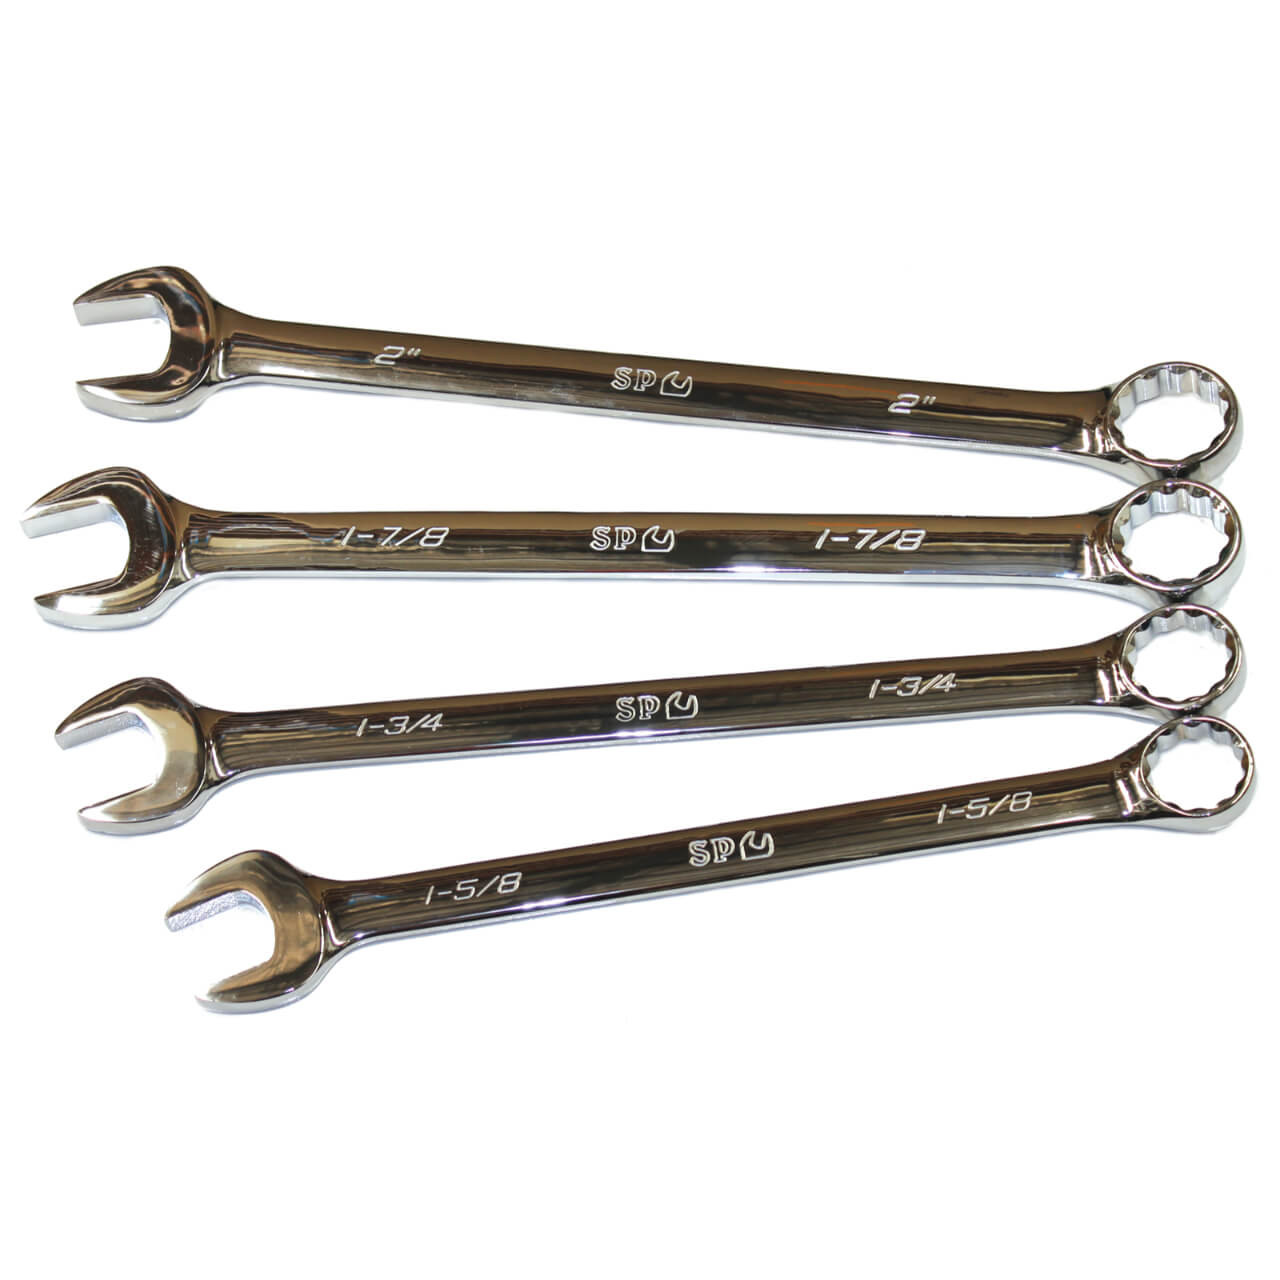 SP Tools 1-5/8-2” Jumbo Combination ROE Spanner Set Imperial 4pce